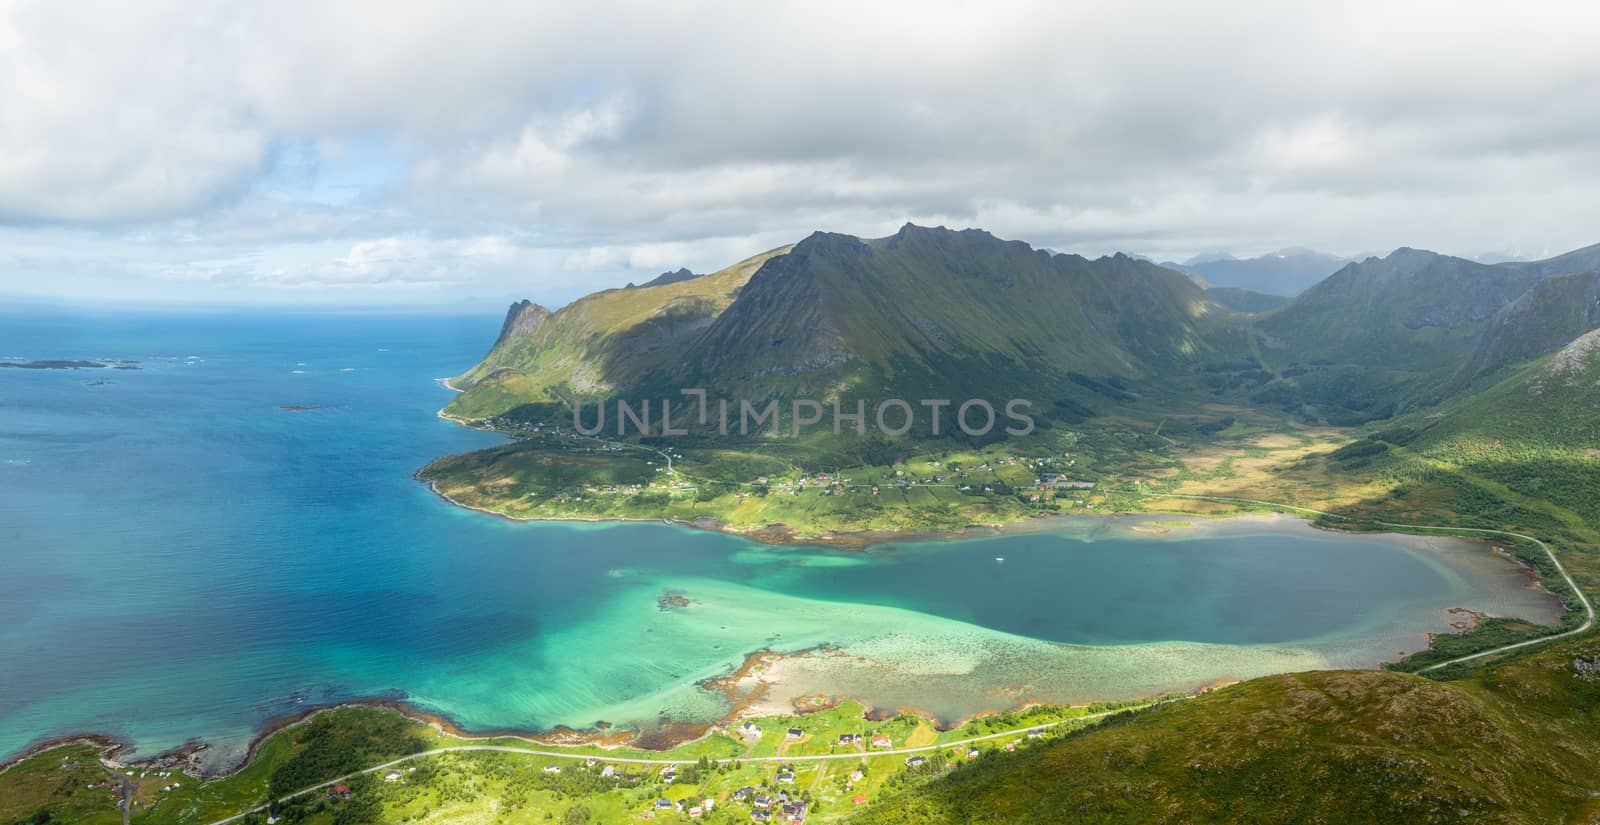 View from the top of Kleppstadheia mountain to the bay with turquoise water, and Rystad and Toe  villages on the shores Austvagoya, Lofotens, Norway